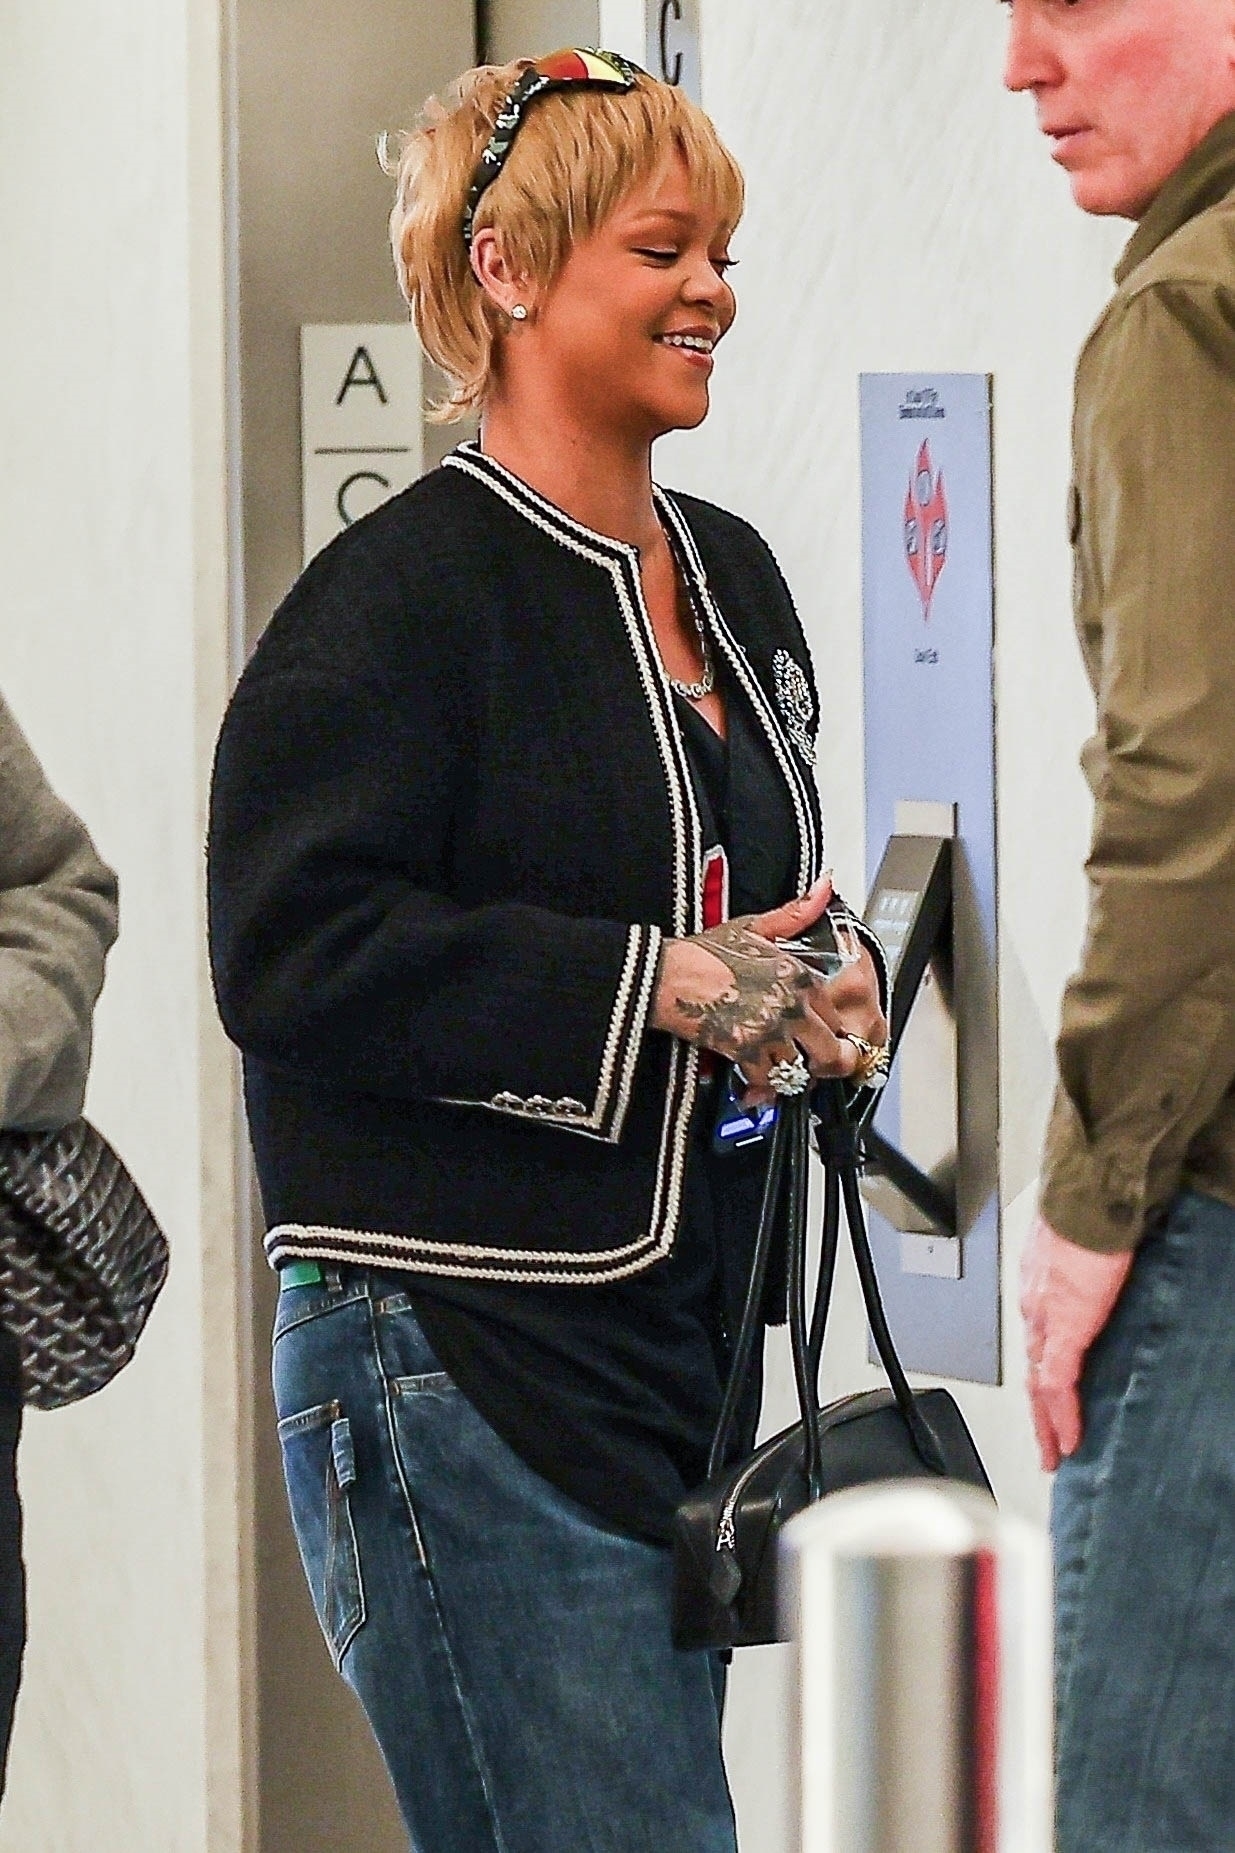 Rihanna has been photographed wearing baggy outfits as speculation surrounding a new pregnancy has risen in recent weeks